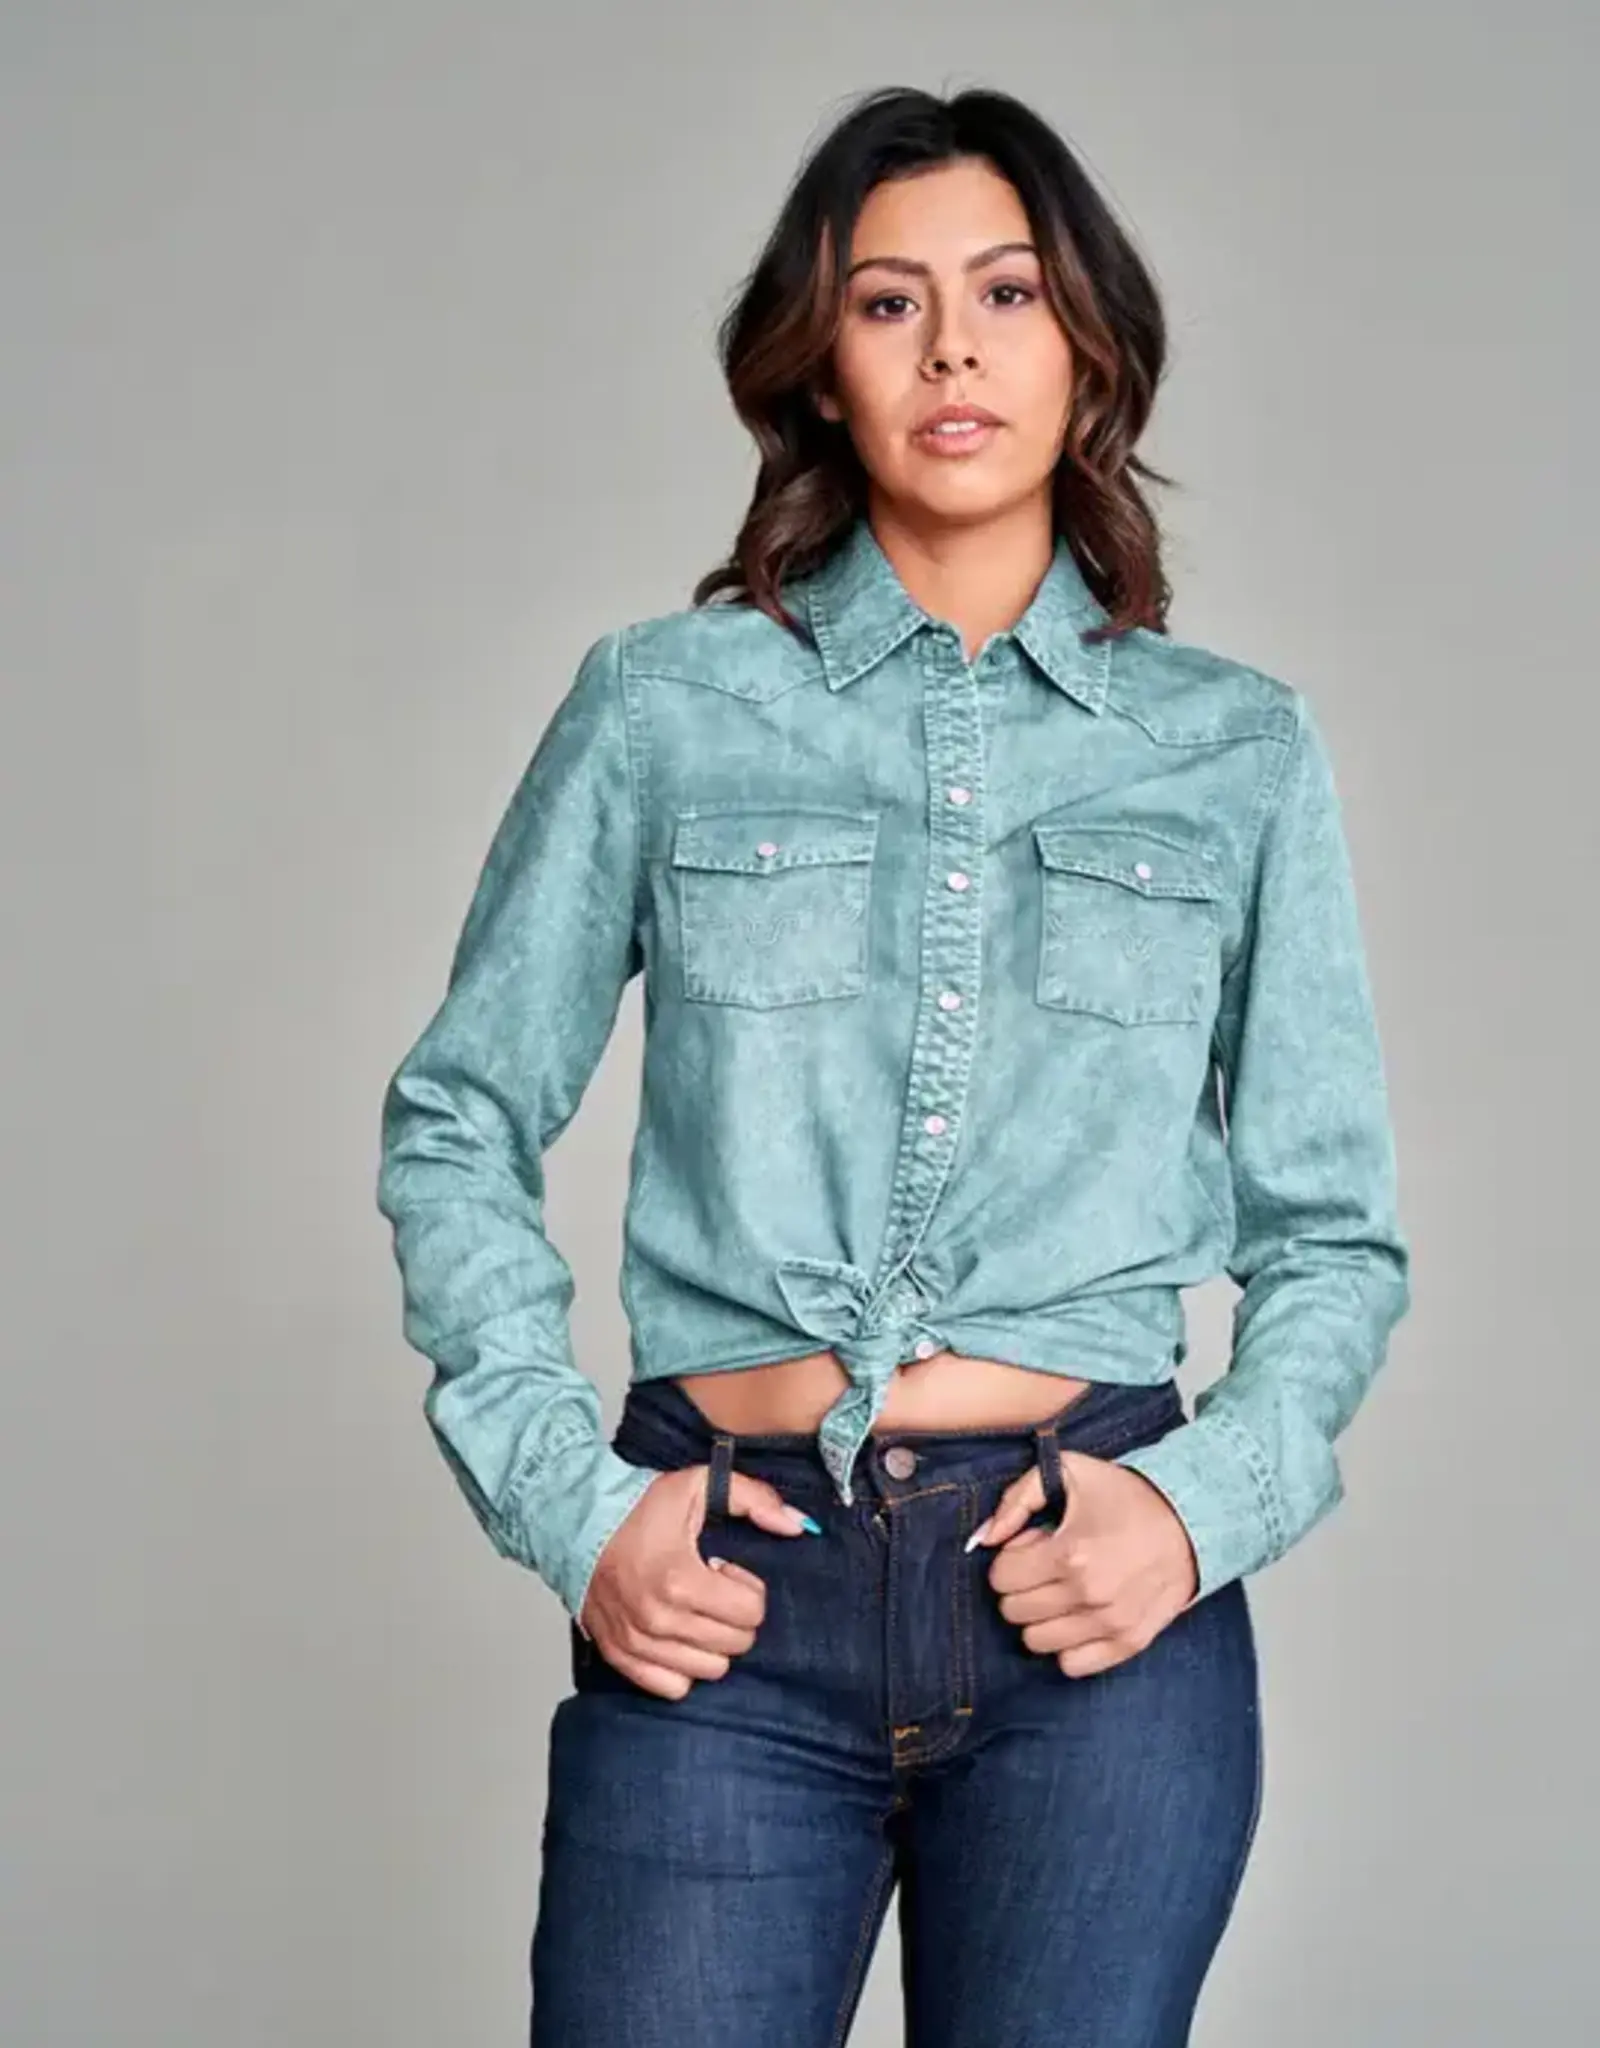 LookbookStore Women's Casual Denim Shirt Tunic Button Down Summer V Neck  Short Rolled Sleeve Blouse Pockets Jean Top Light Blue Size Small at Amazon  Women's Clothing store